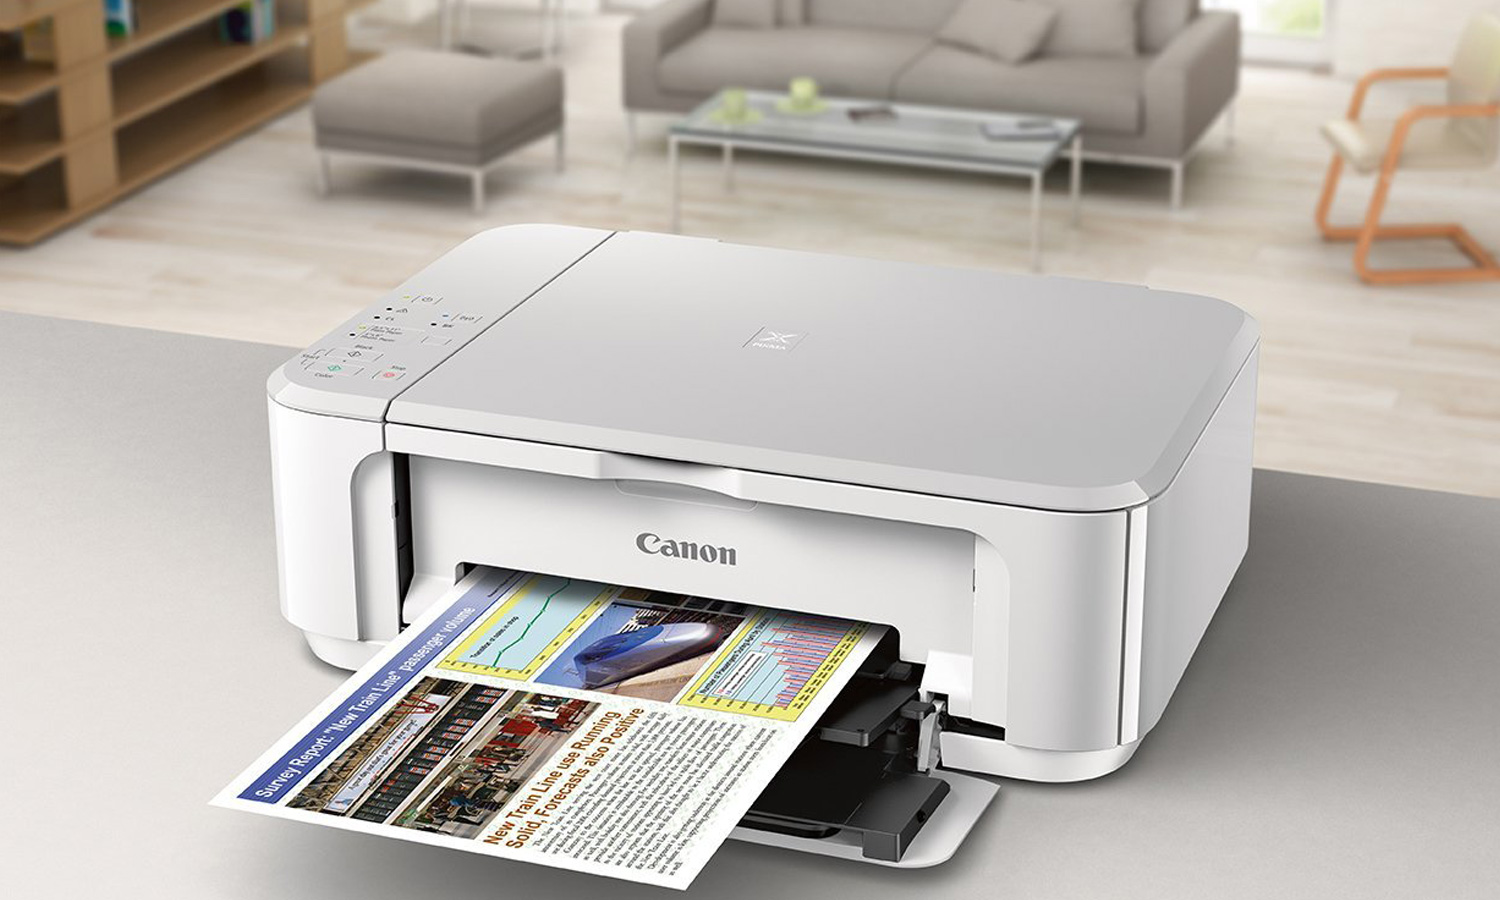 The Canon MG3620 is a good bargain printer that comes with a duplexer.